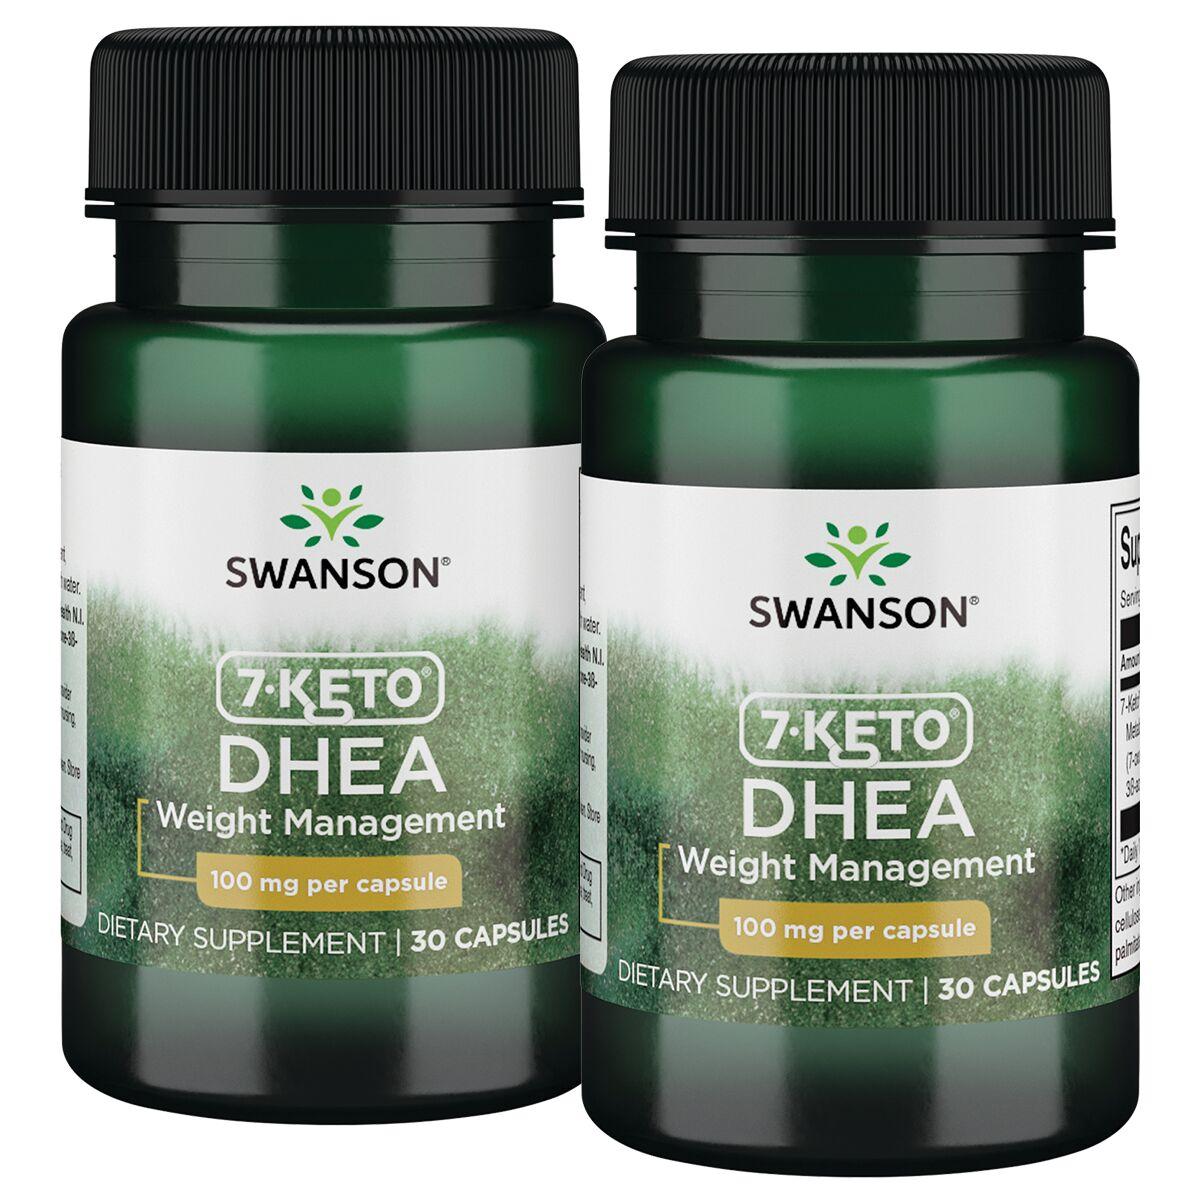 Swanson Best Weight-Control Formulas 7-Keto Dhea - 2 Pack Supplement Vitamin 100 mg 30 Caps Per Bottle Weight Control Weight Management